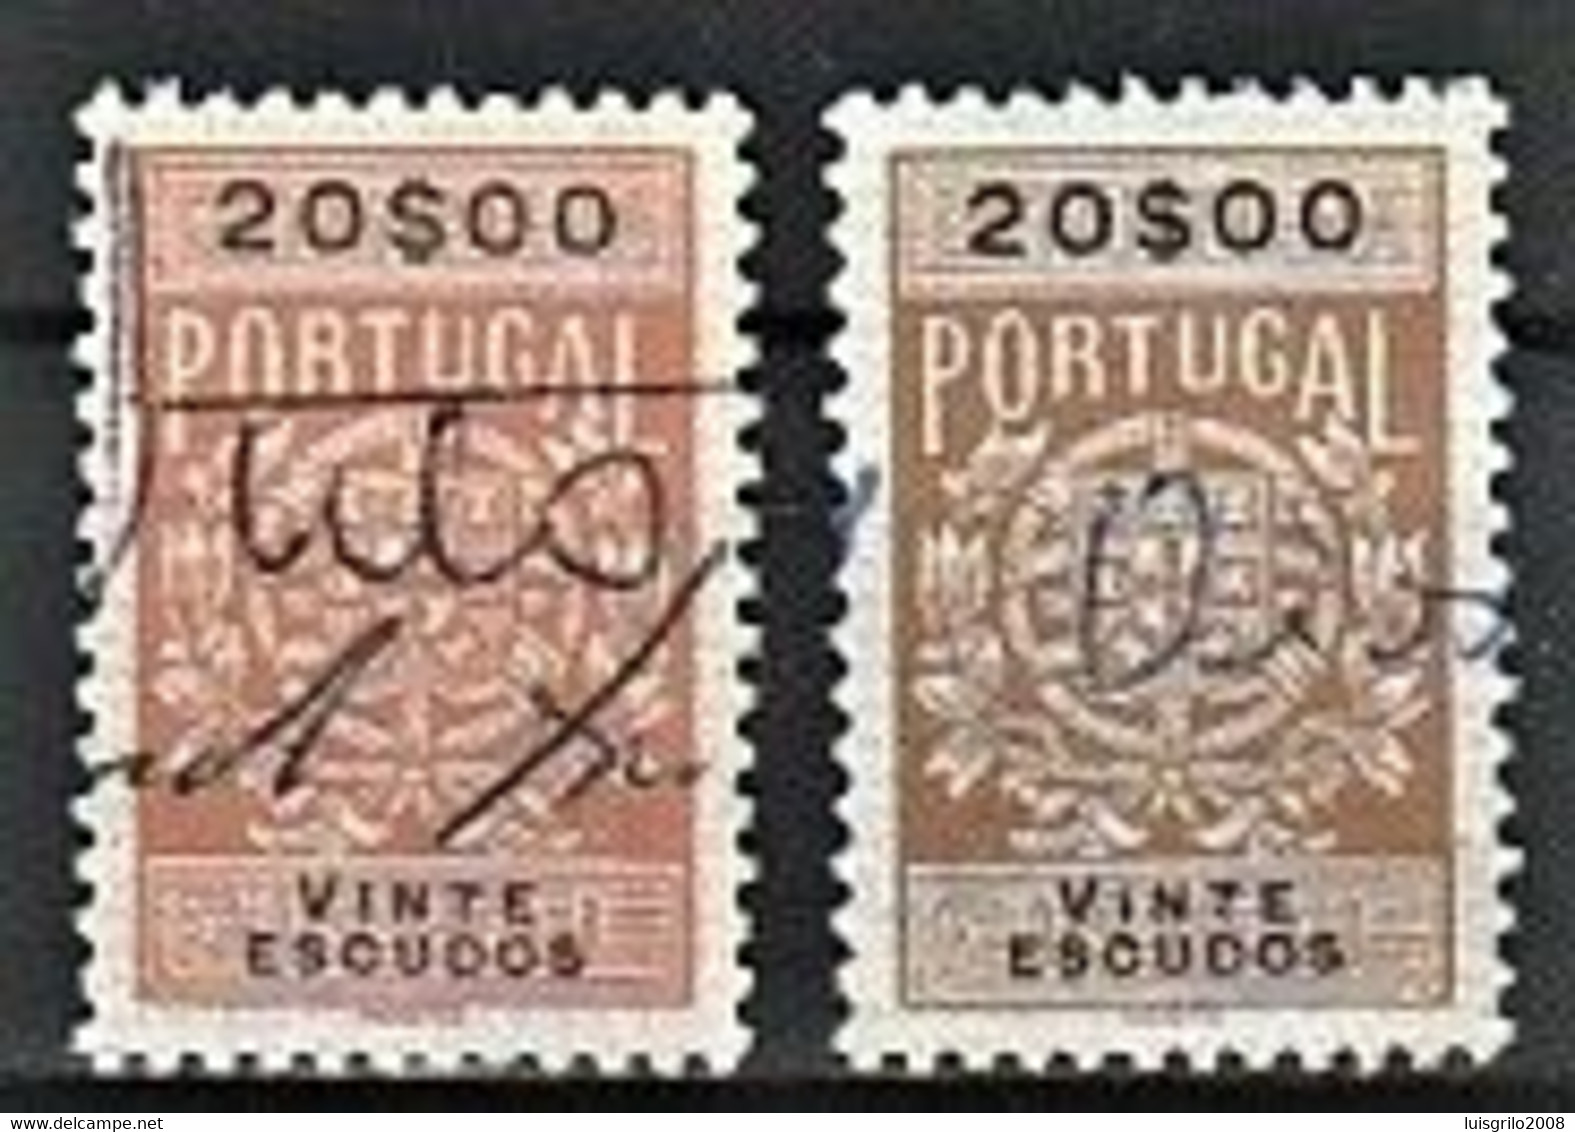 Fiscal/ Revenue, Portugal 1940 - Estampilha Fiscal -|- 20$00 - COLOR VARIANT - Is The Stamp Of The Right - Gebraucht